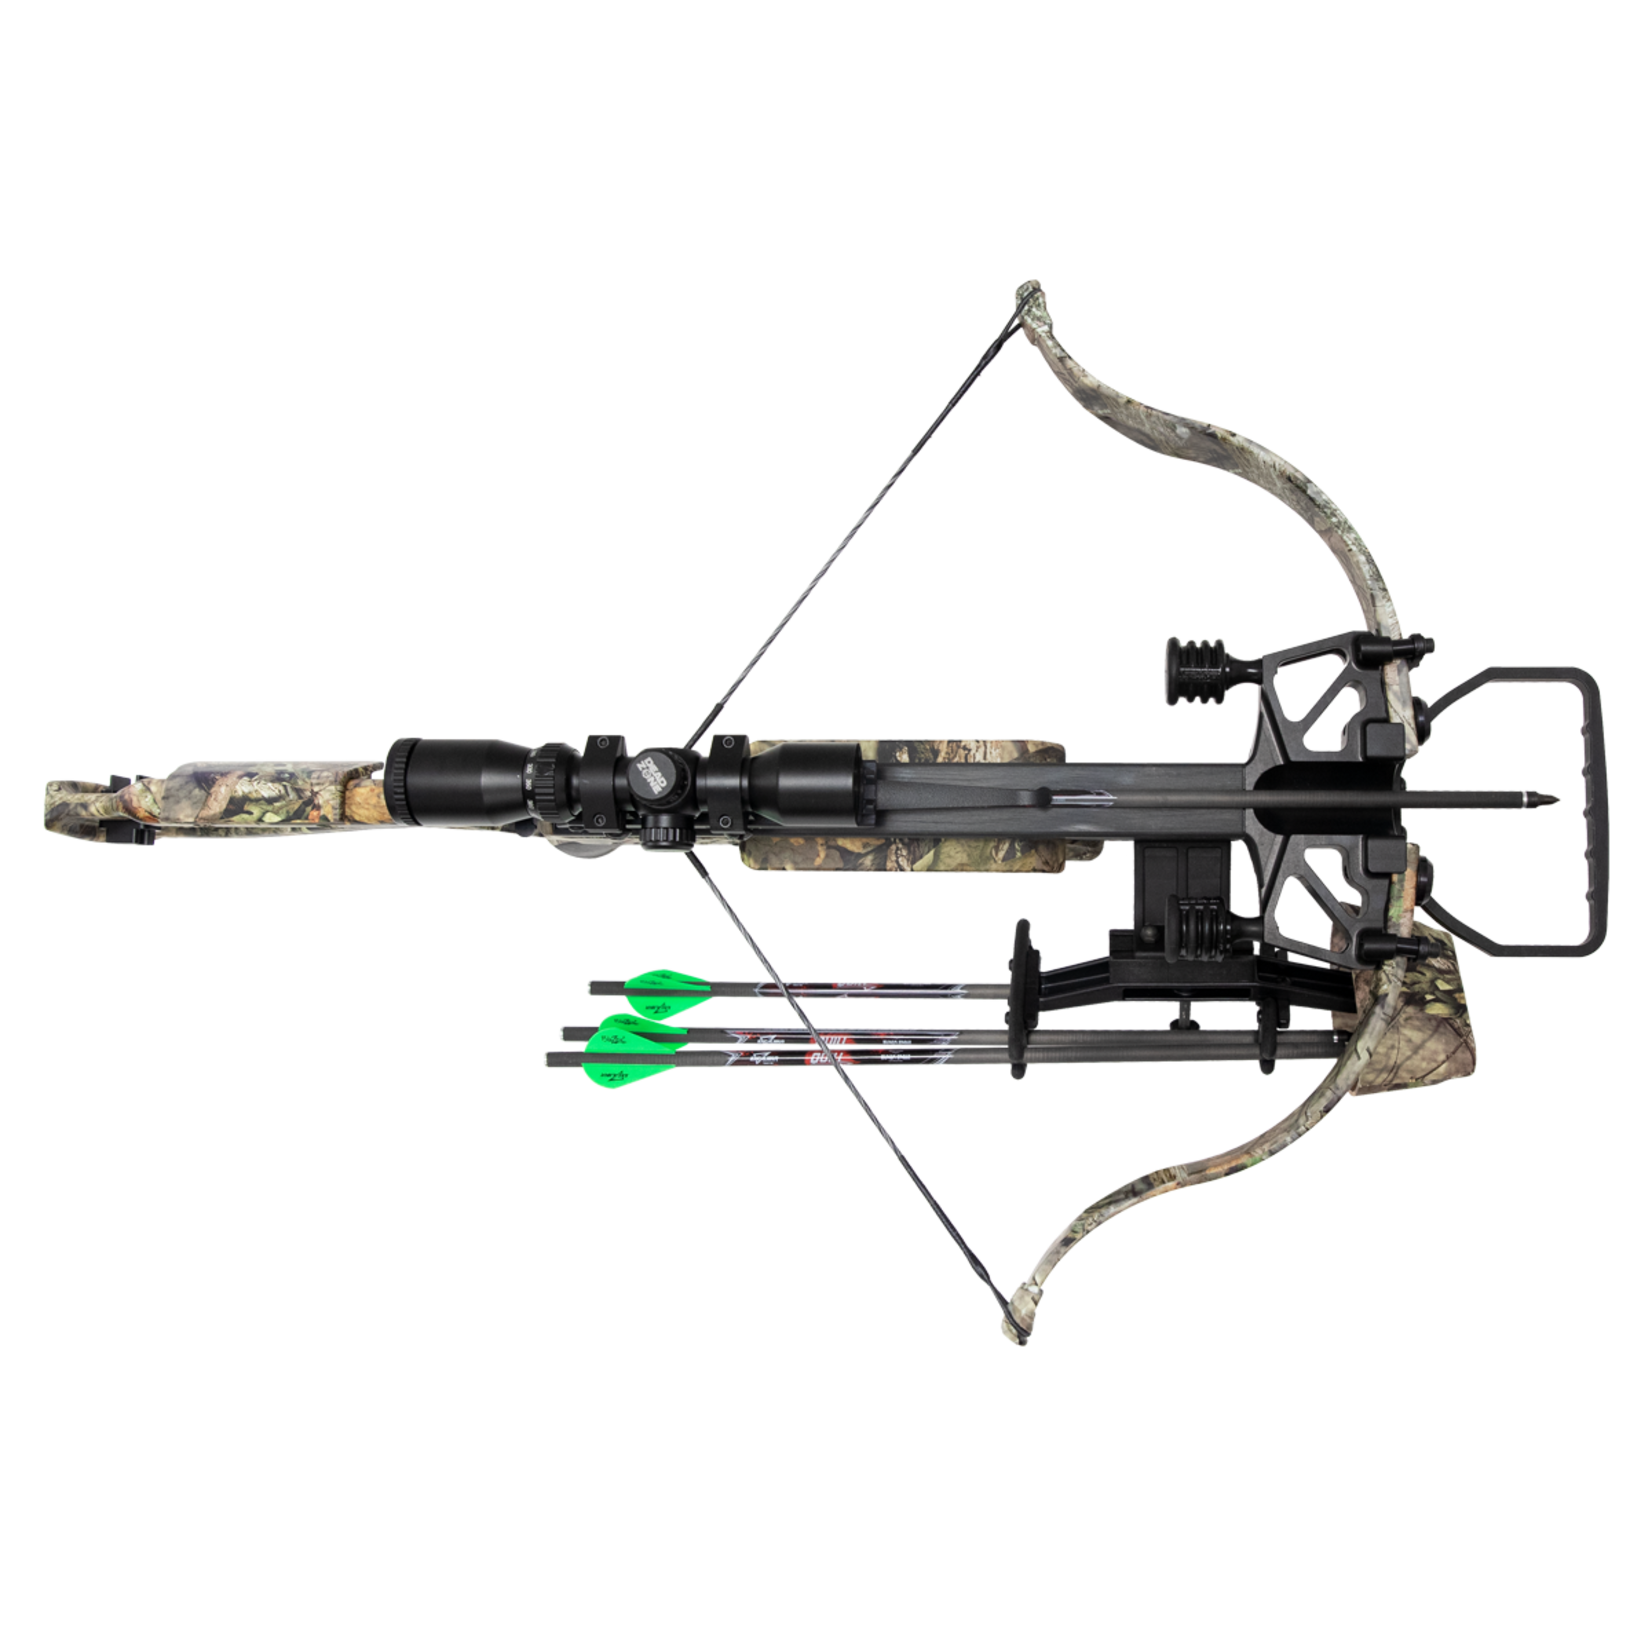 Excalibur Micro 340 Td- Realtree Timber- W/ Tact 100 Scope